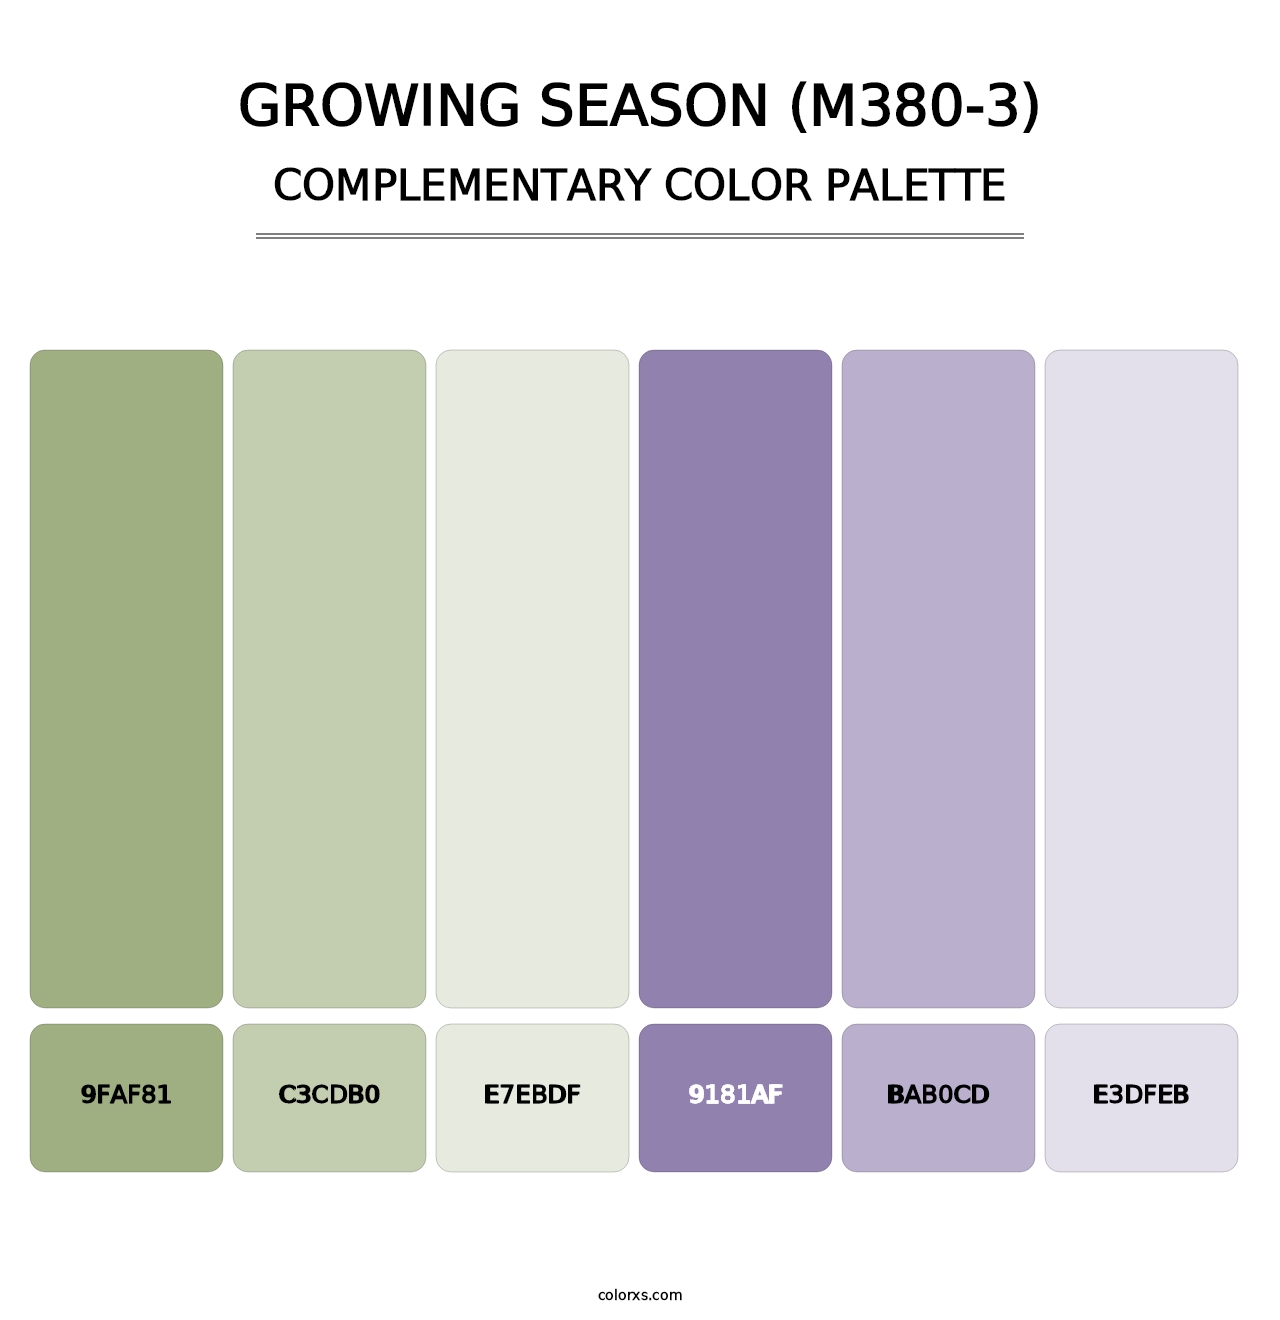 Growing Season (M380-3) - Complementary Color Palette